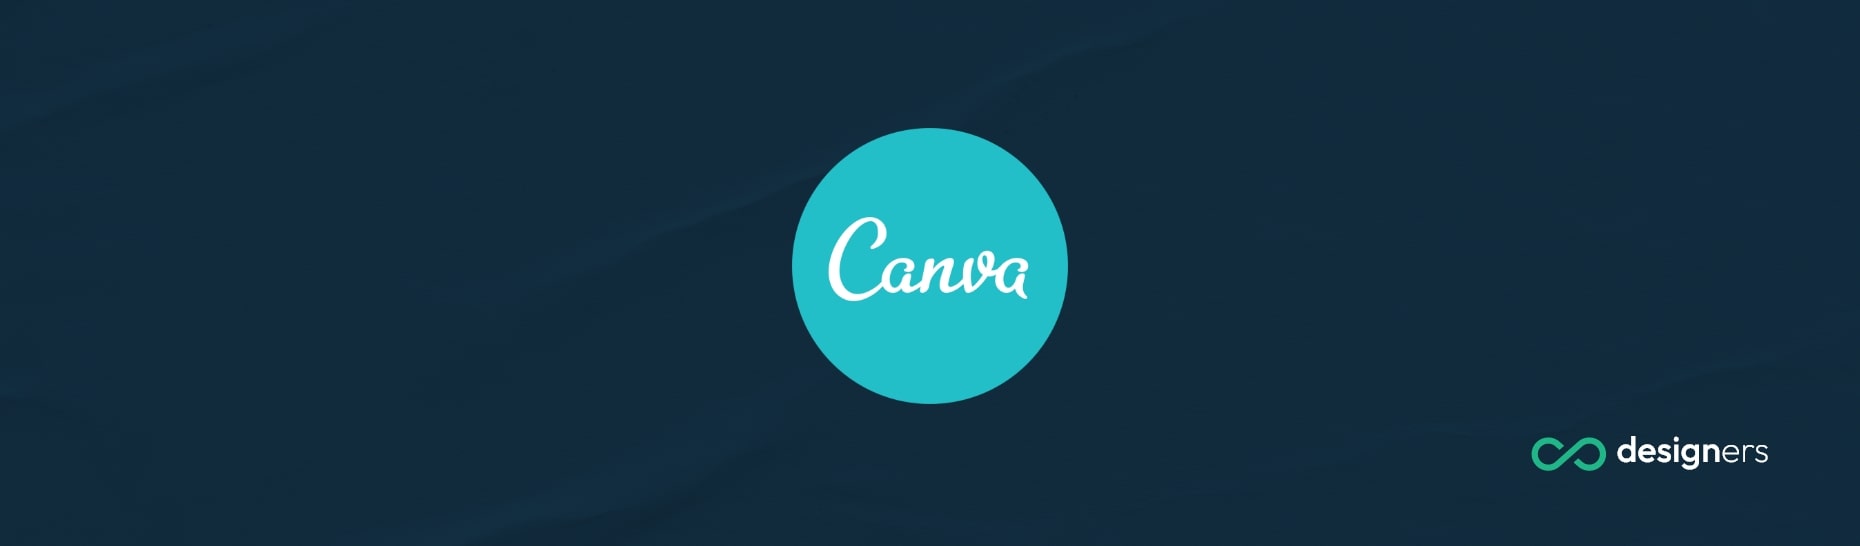 How Does Canva Get Funding?